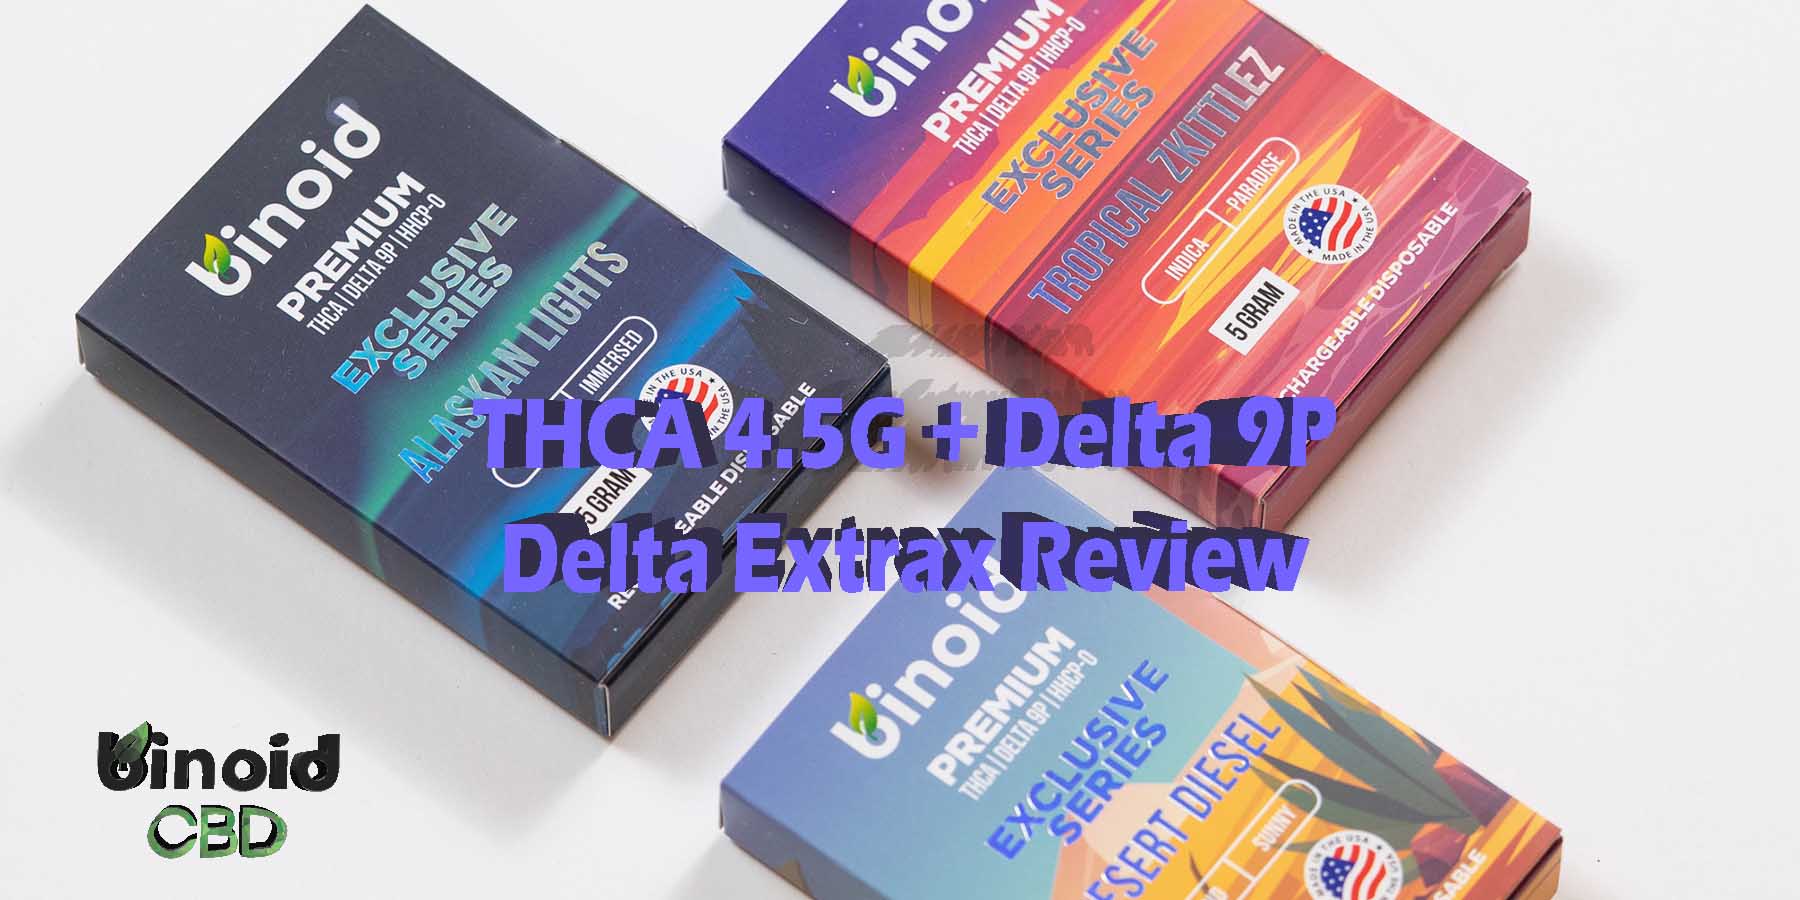 THCA 4.5G Delta 9P Delta Extrax Review Gram Take Work Online Best Brand Price Get Near Me Lowest Coupon Discount Store Shop Vapes Carts Online Binoid Review